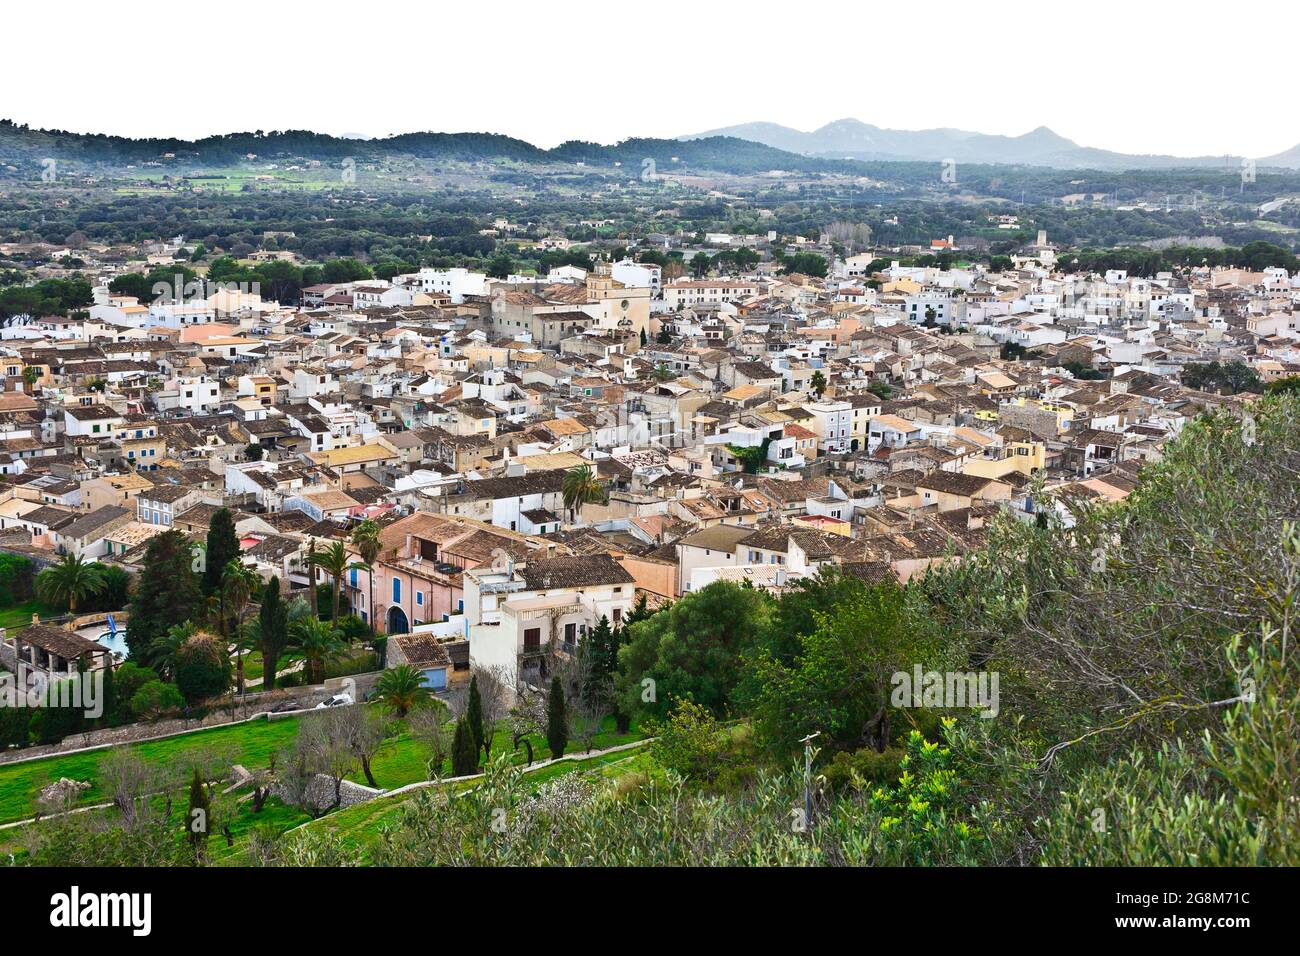 Arta, Majorca or Mallorca, Spain - January 29, 2015: Panoramic view over the roofs of the old town in soft evening light. Stock Photo